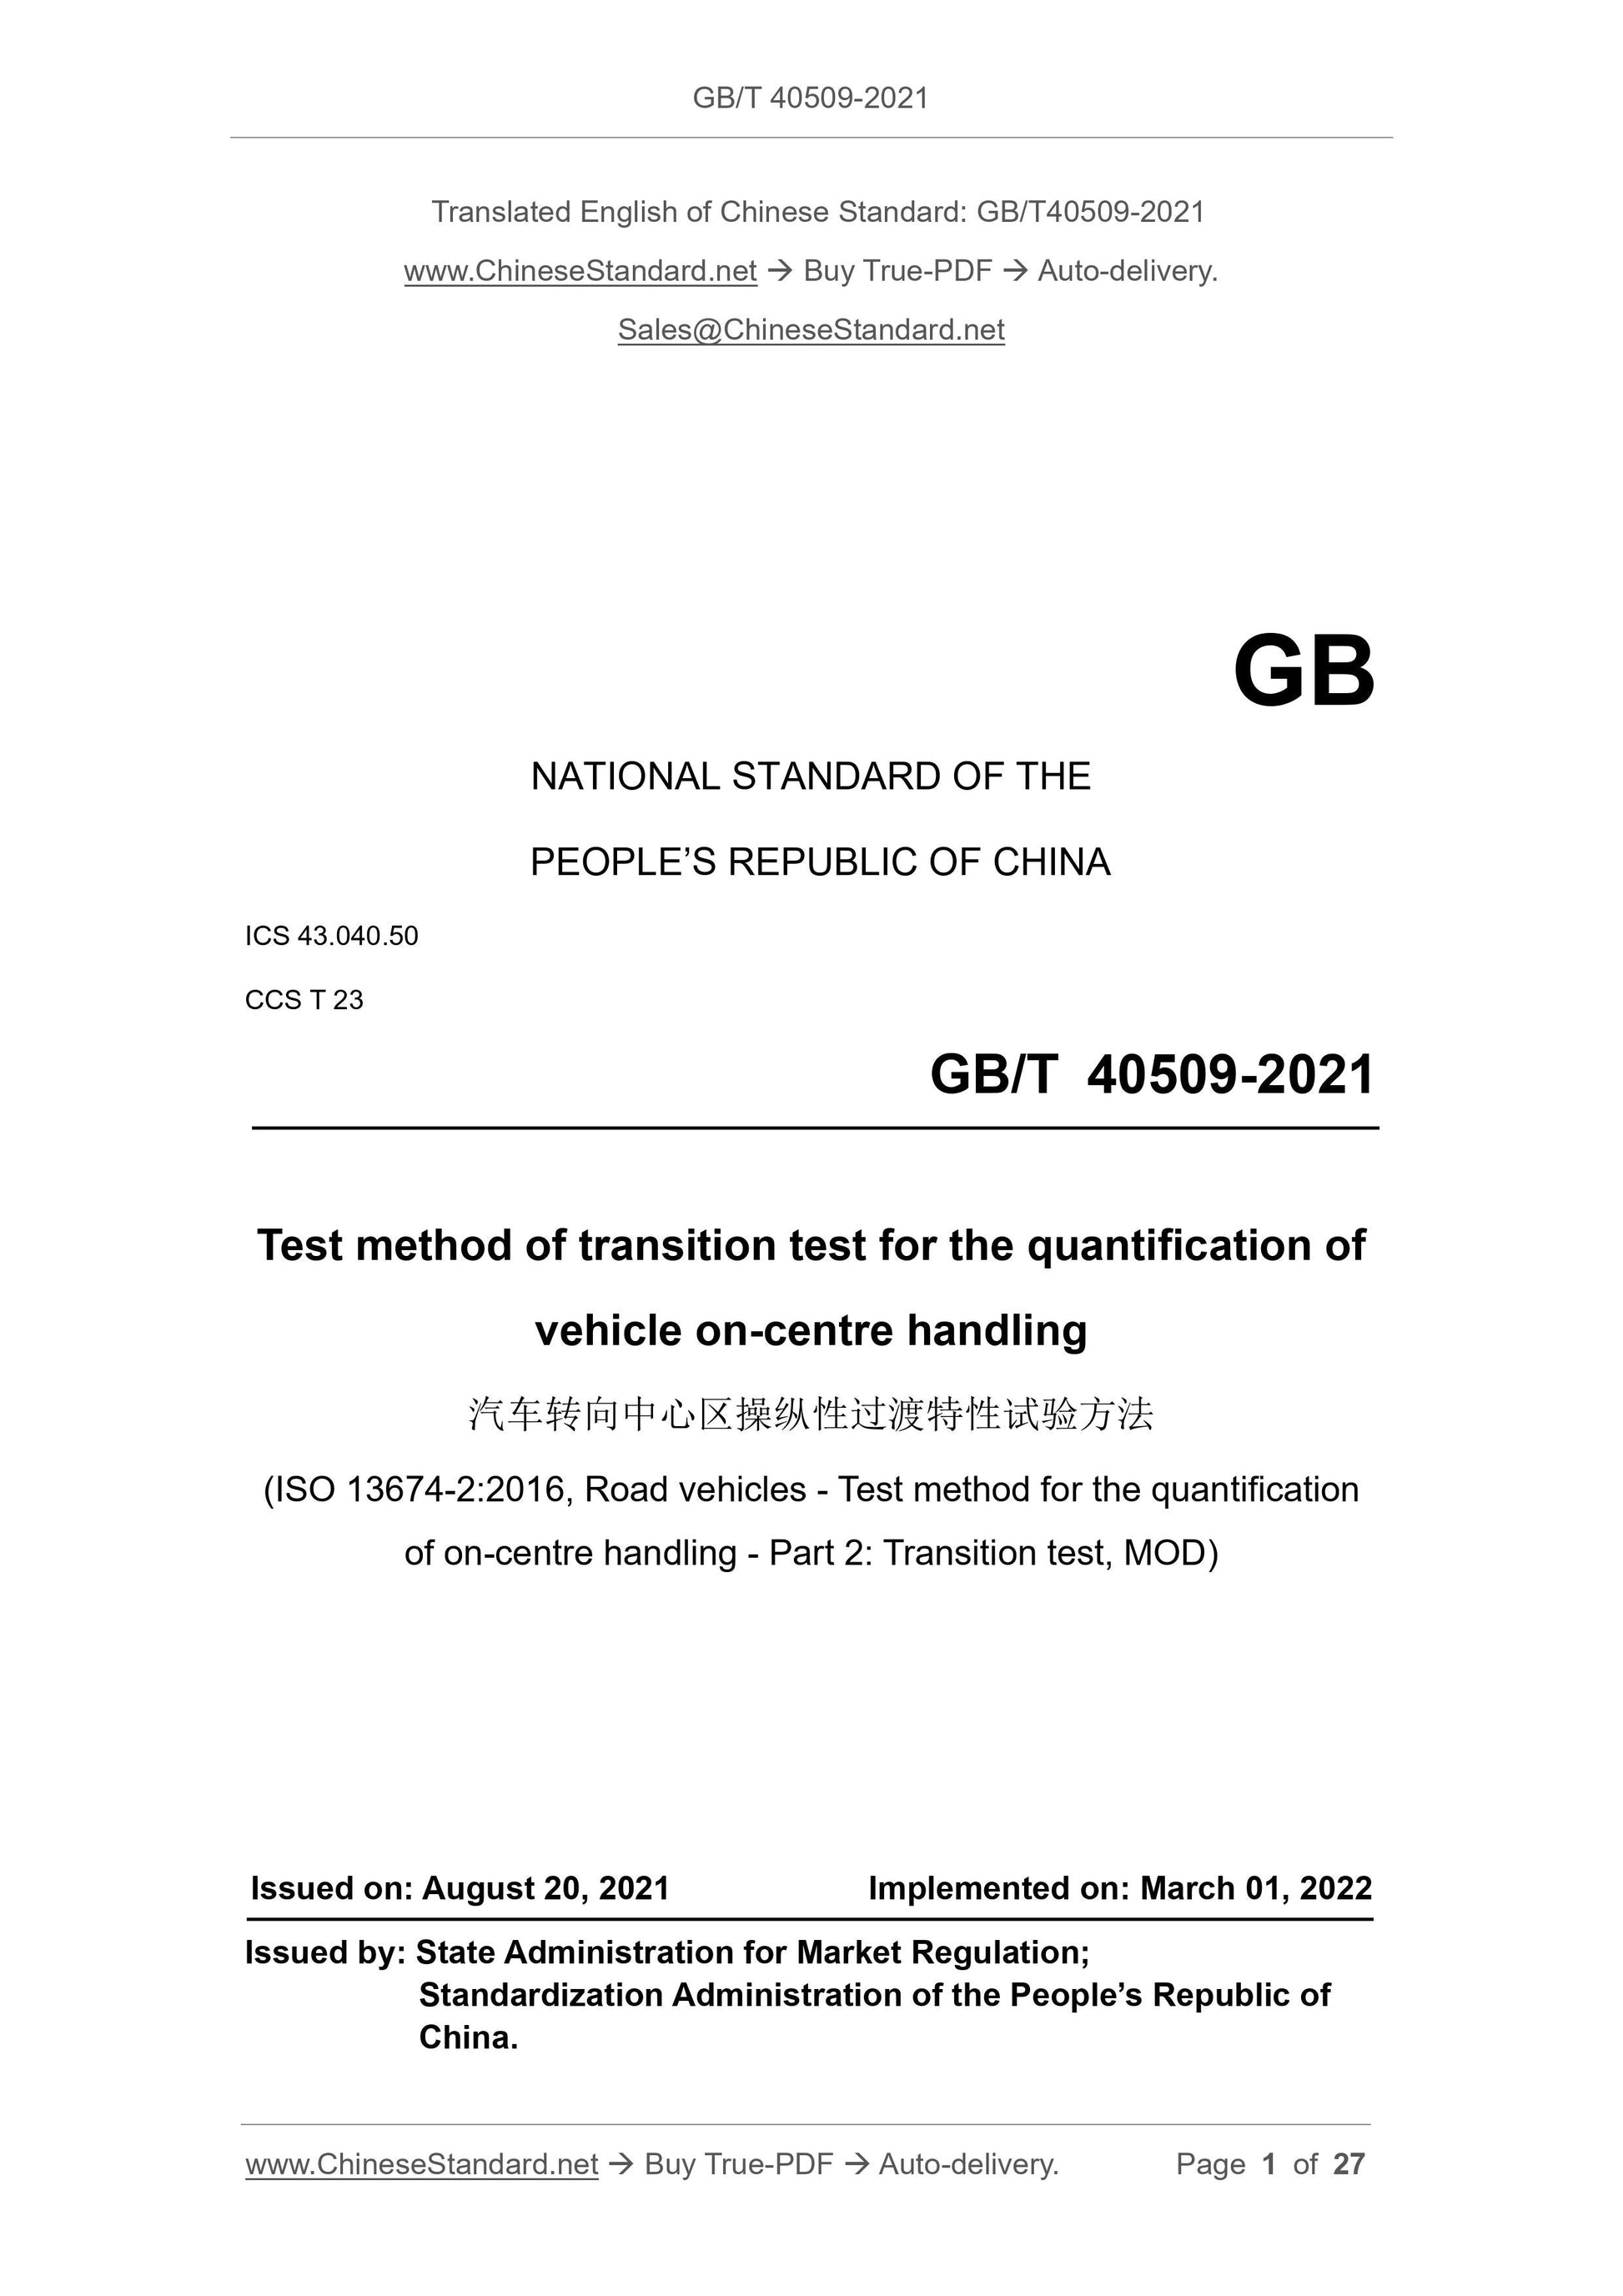 GB/T 40509-2021 Page 1